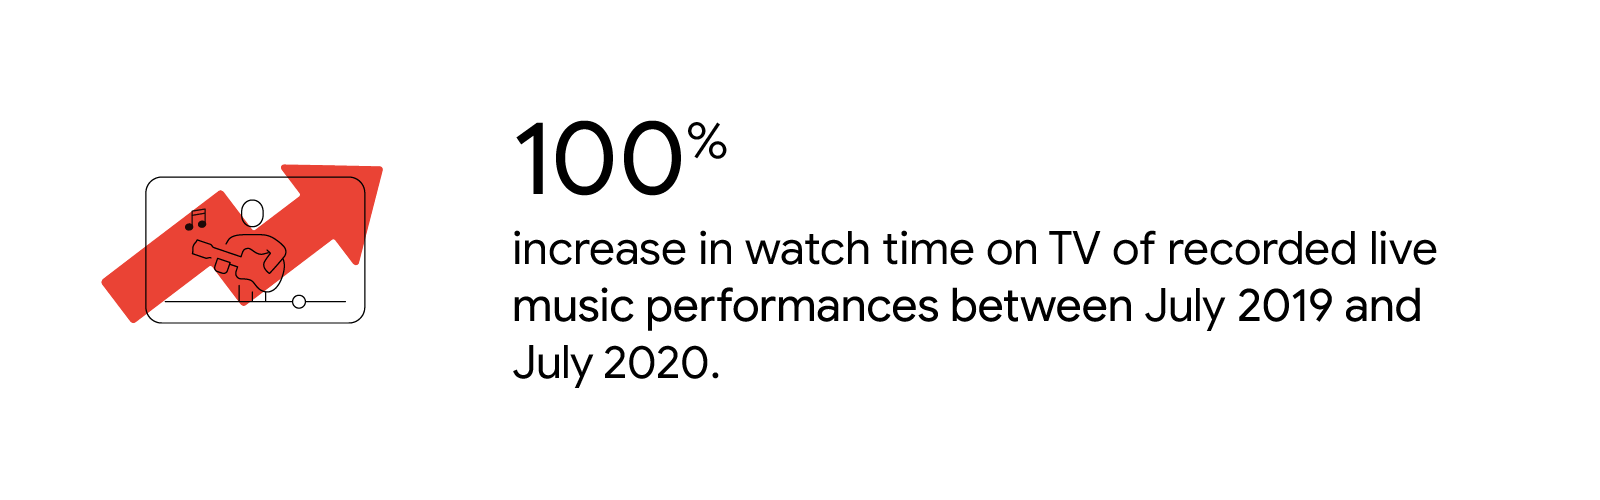 An illustration of a video screen with a person playing guitar represents the 100% increase in watch time on TV of recorded live music performances on YouTube between July 2019 and July 2020.